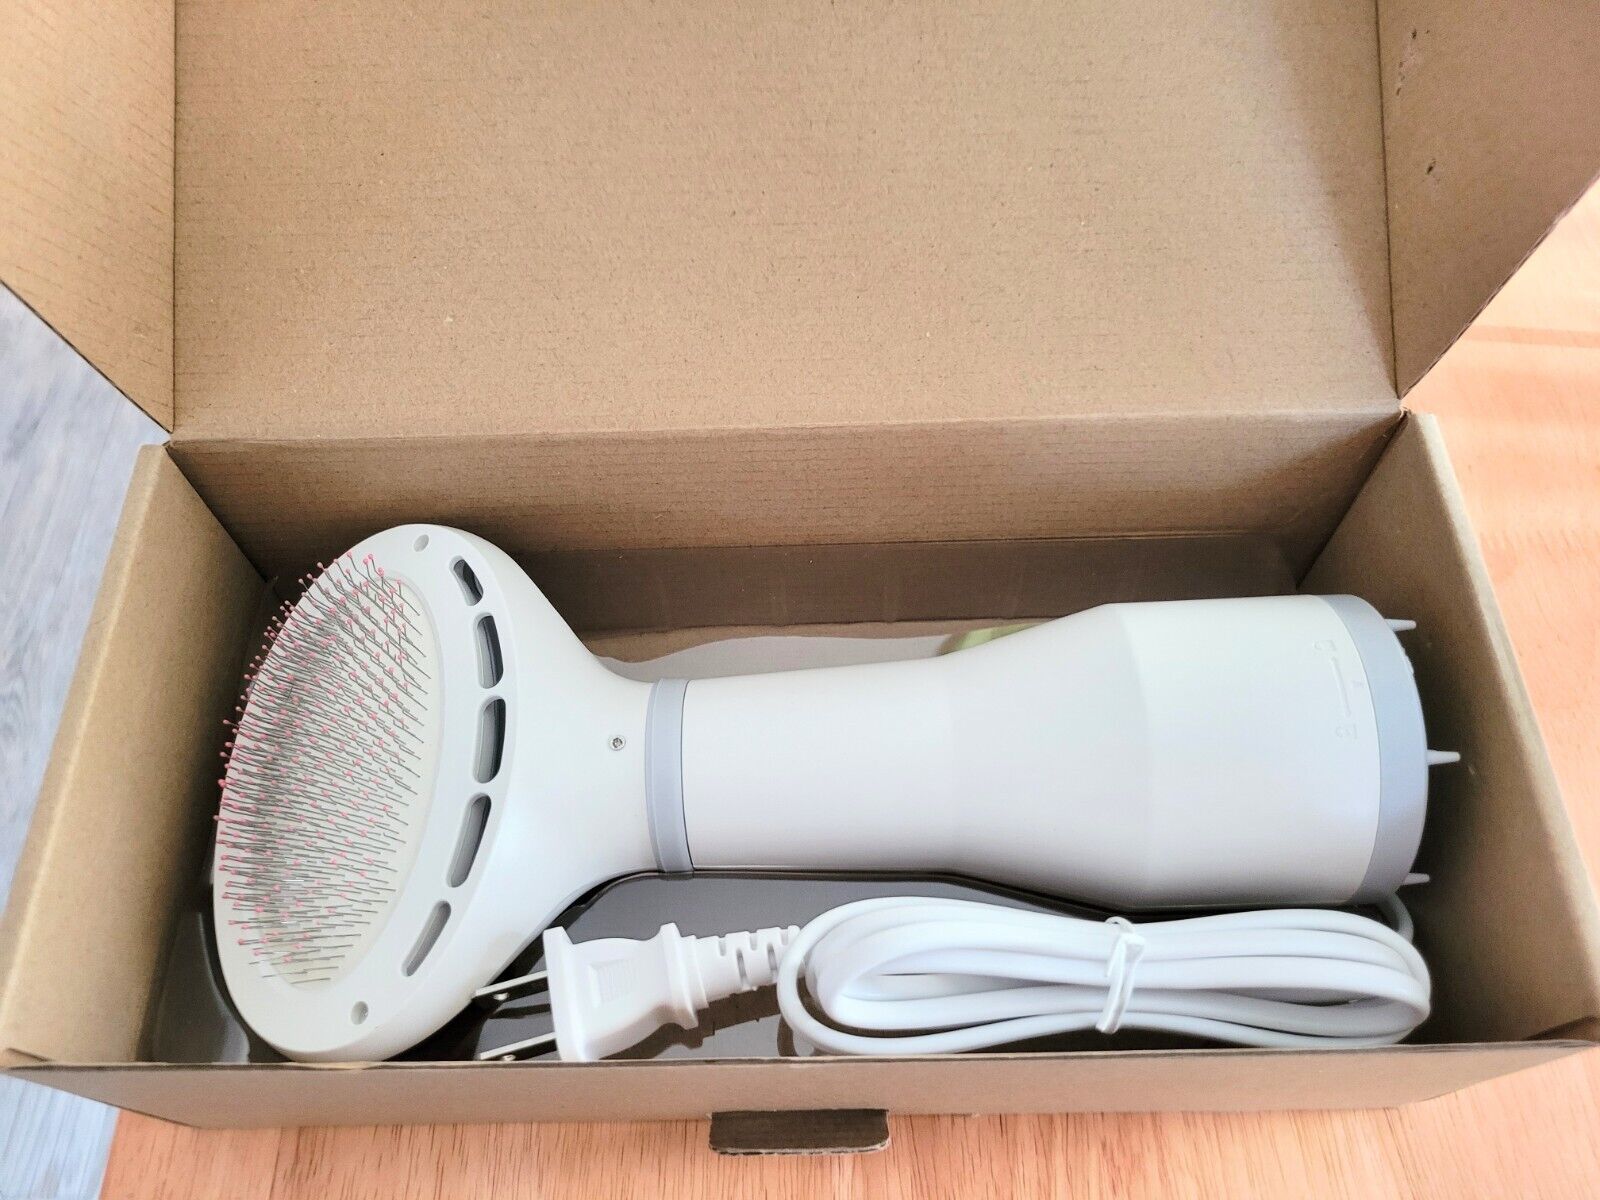 Primary image for isYoung Pet Hair Dryer with Slicker Brush Portable Dog Blower, **BRAND NEW**